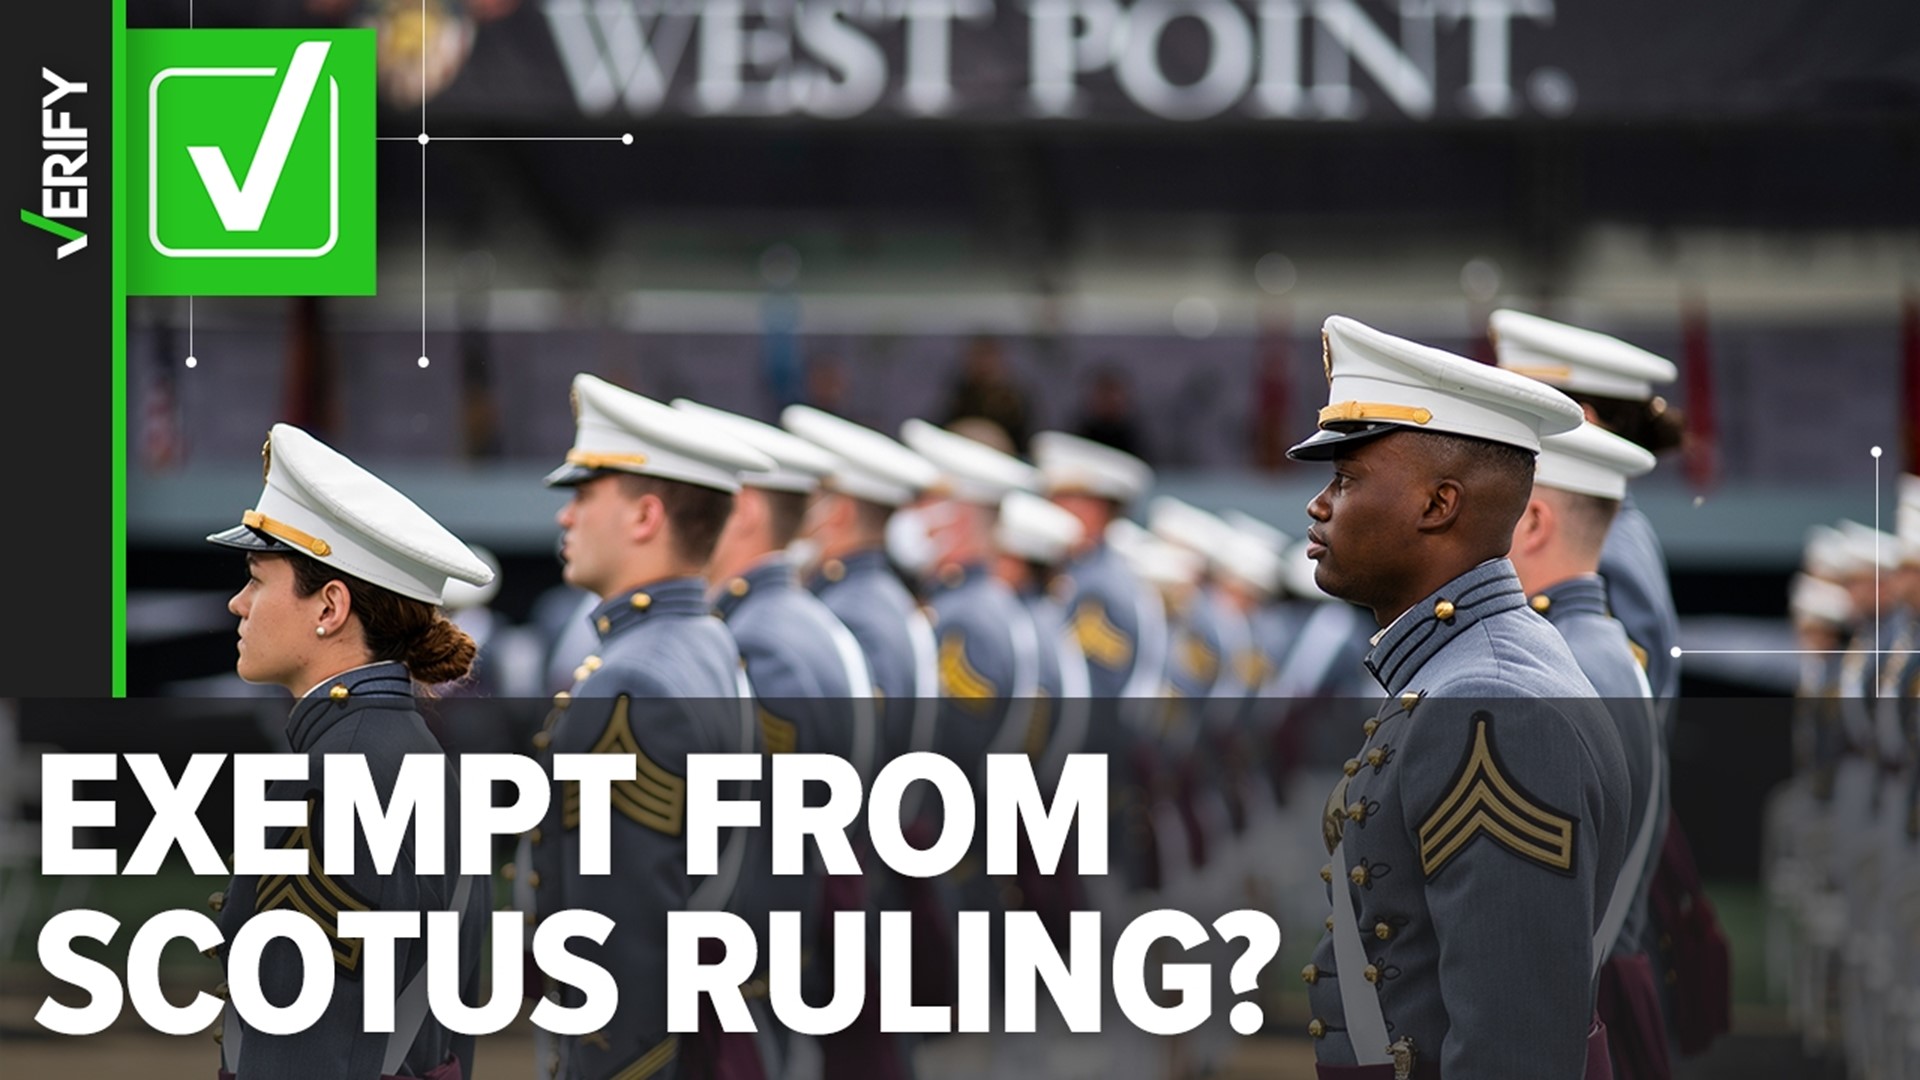 Supreme Court Chief Justice John Roberts wrote that military academies like West Point are exempt from the opinion on race-based admissions being unconstitutional.